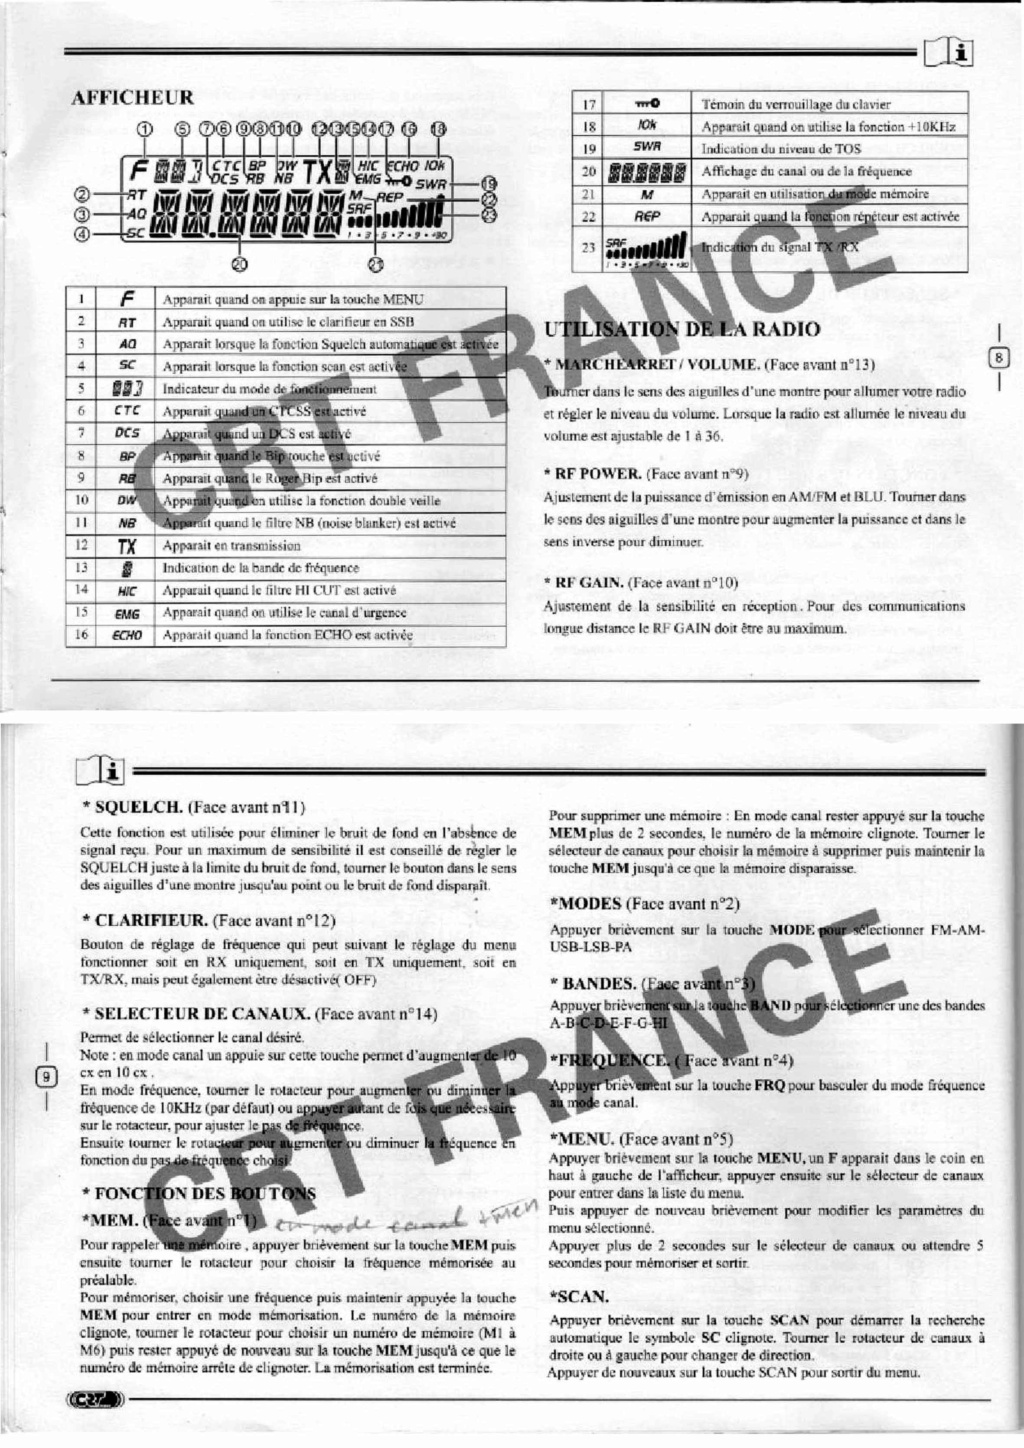 CRT SS 9900 v4 (Mobile) - Page 17 Feuill16